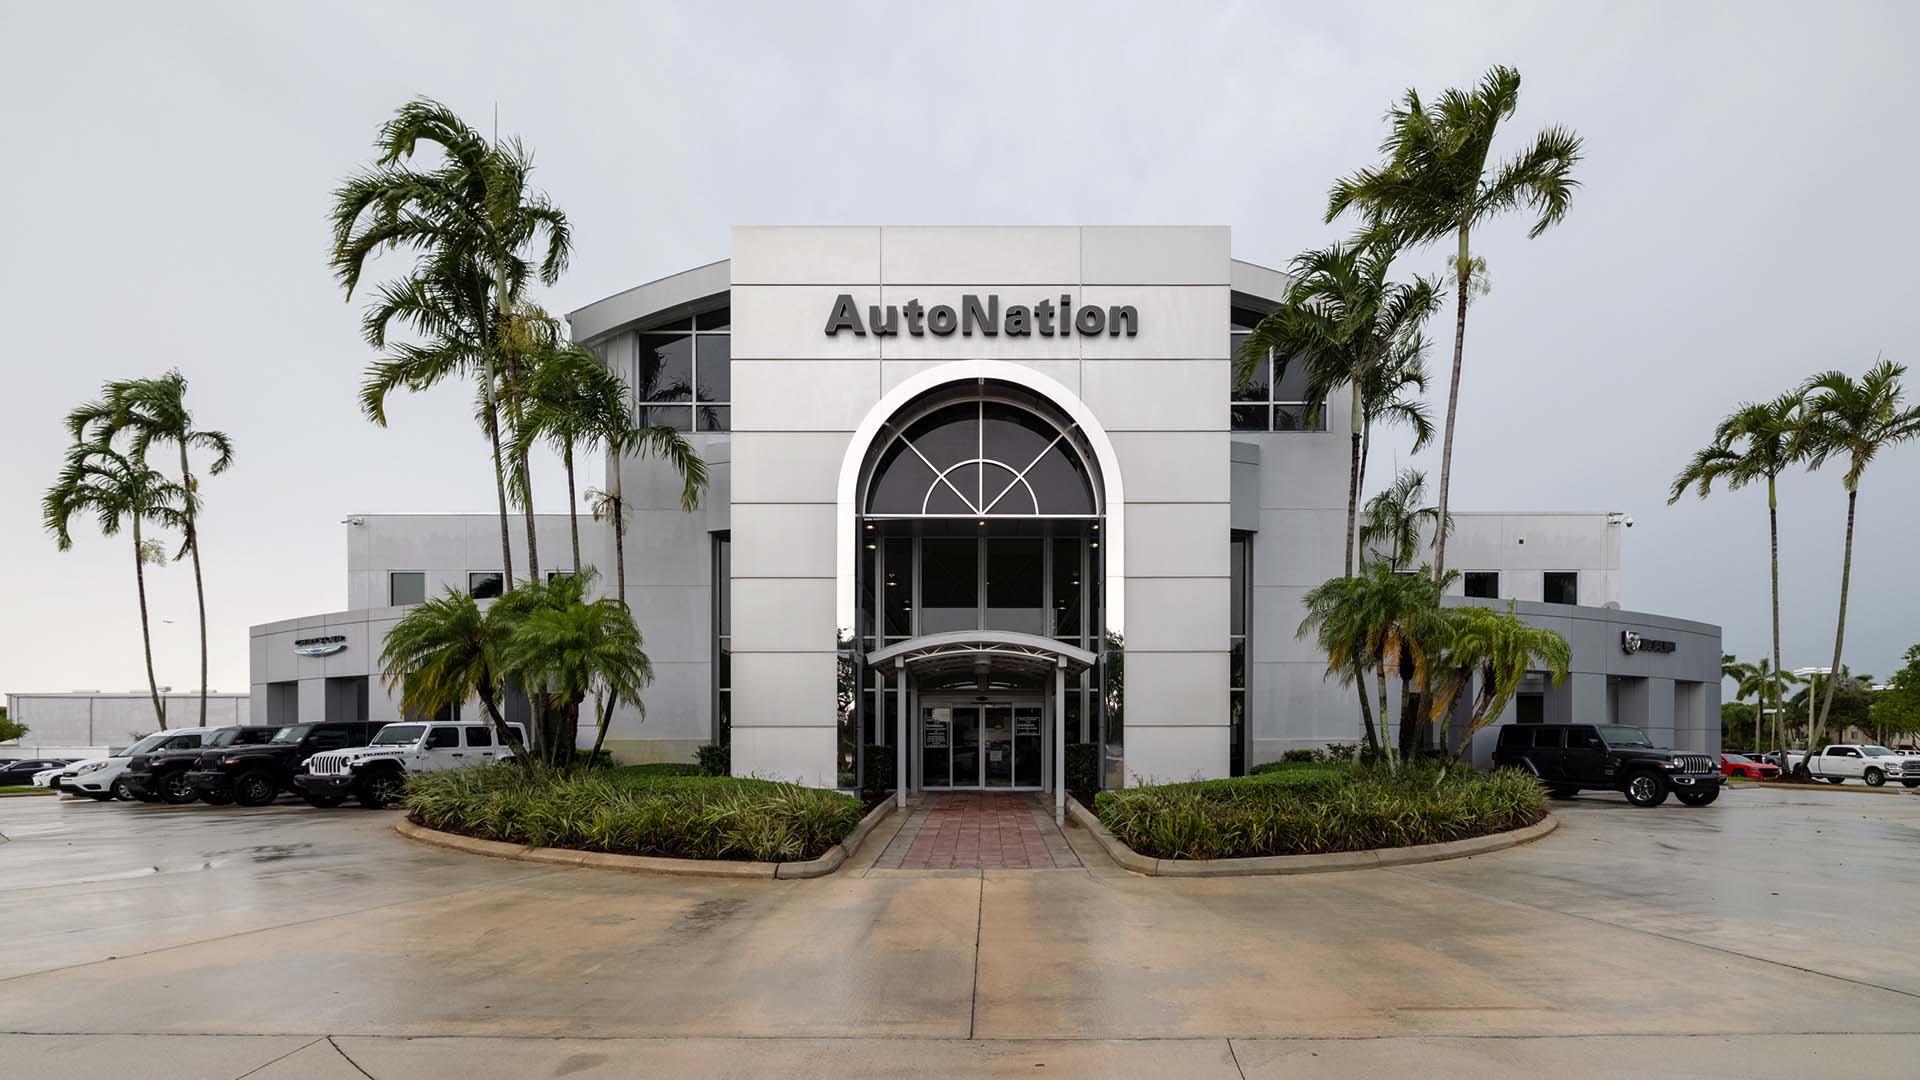 Exterior view of AutoNation Chrysler Dodge Jeep RAM Pembroke Pines during the day. There is a cloudy sky and many vehicles parked near the grey building. Trees and greenery are visible around the parking lot.